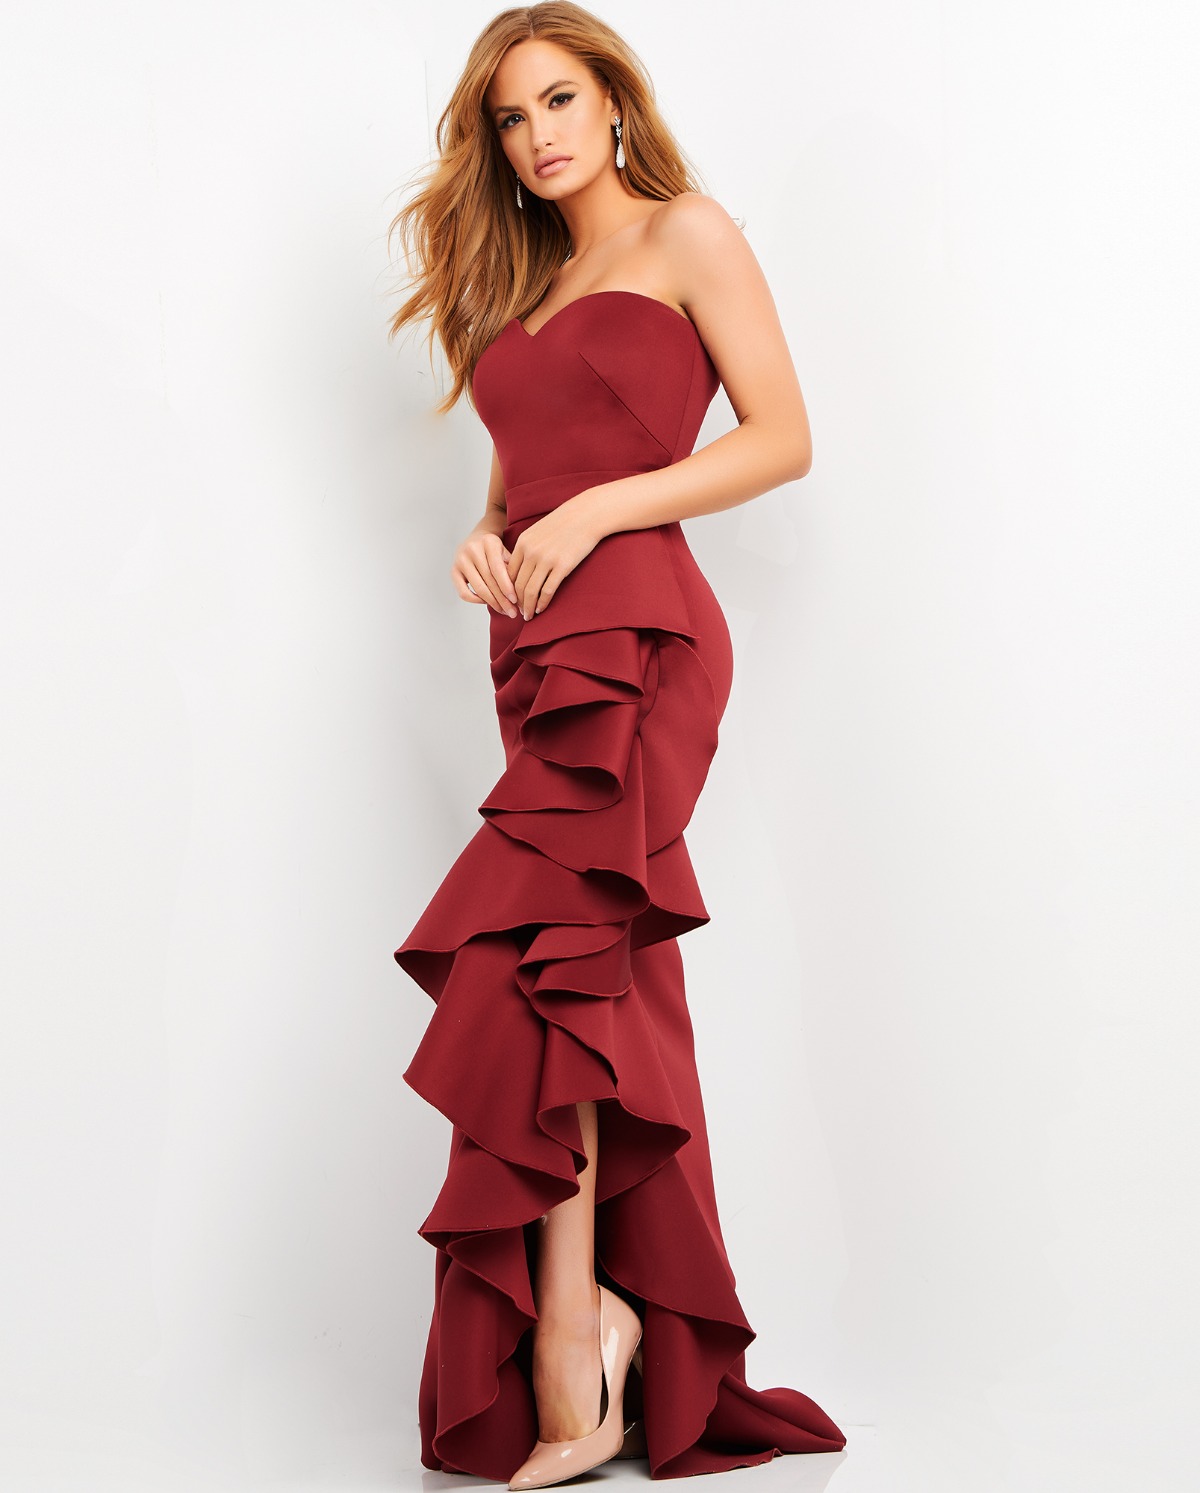 Classy Mother of the Bride Dresses Perfect for your Daughterâs Wedding